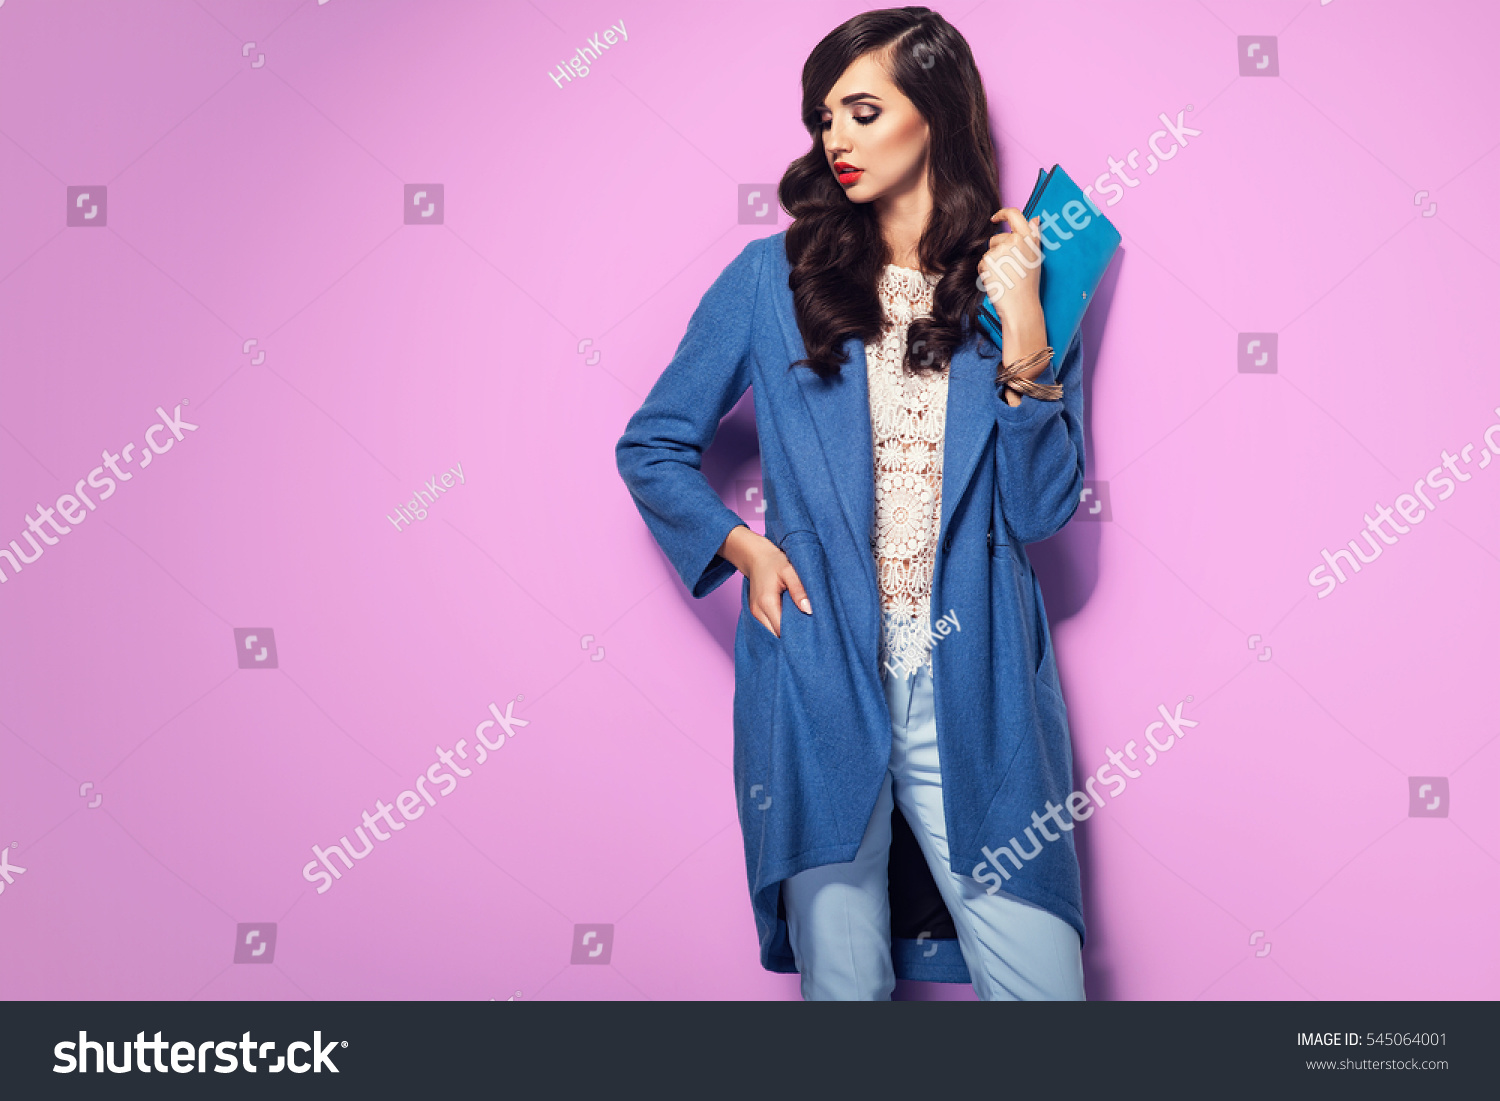 Beautiful brunette woman in a blue coat and nice top. Fashion spring autumn winter photo #545064001